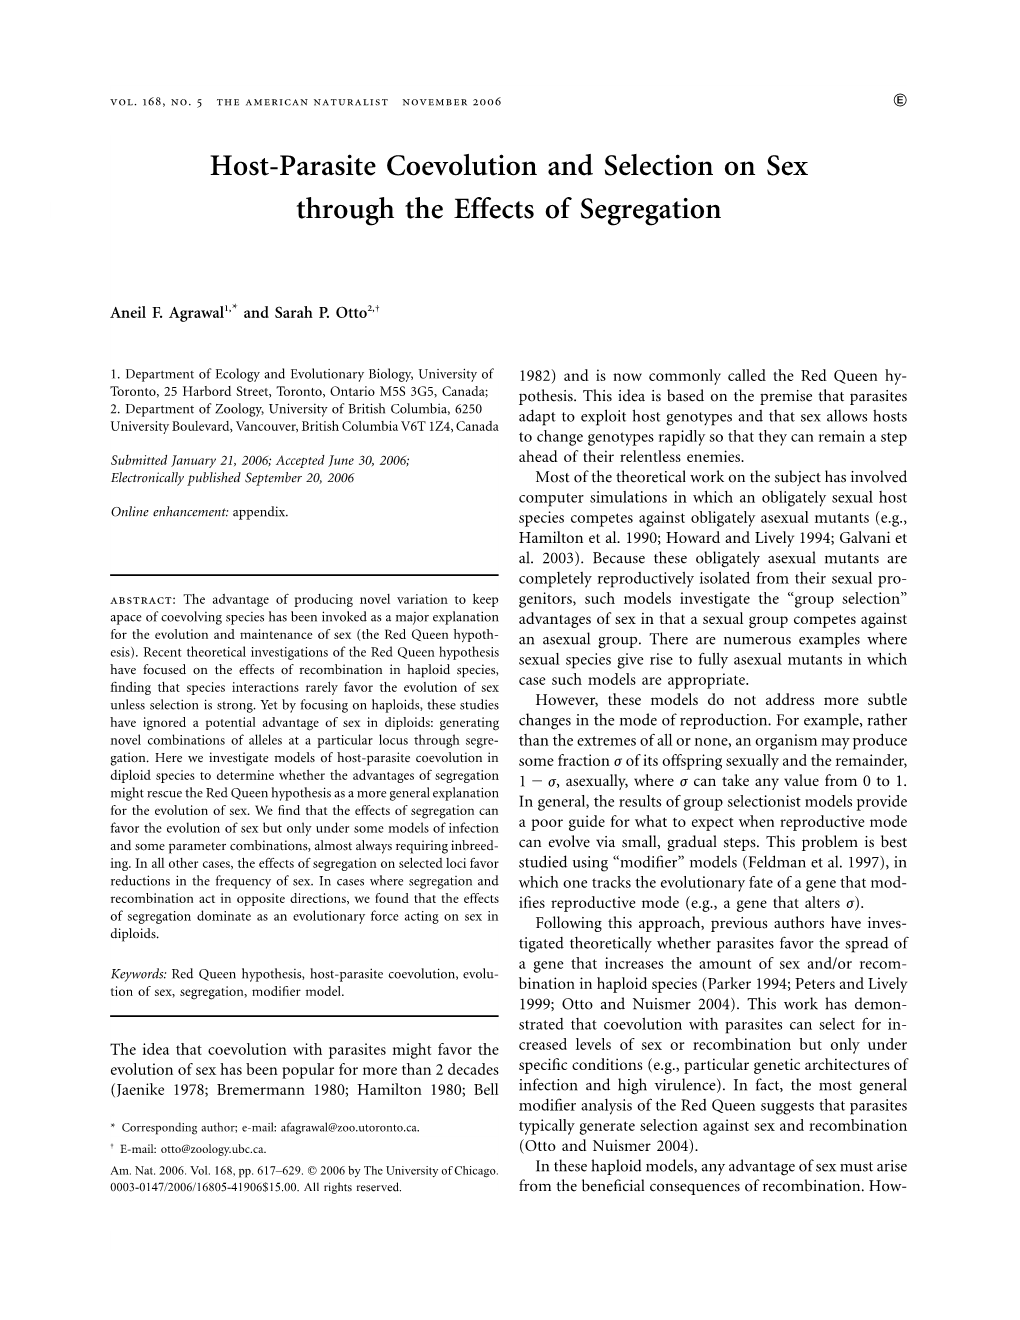 Host-Parasite Coevolution and Selection on Sex Through the Effects of Segregation